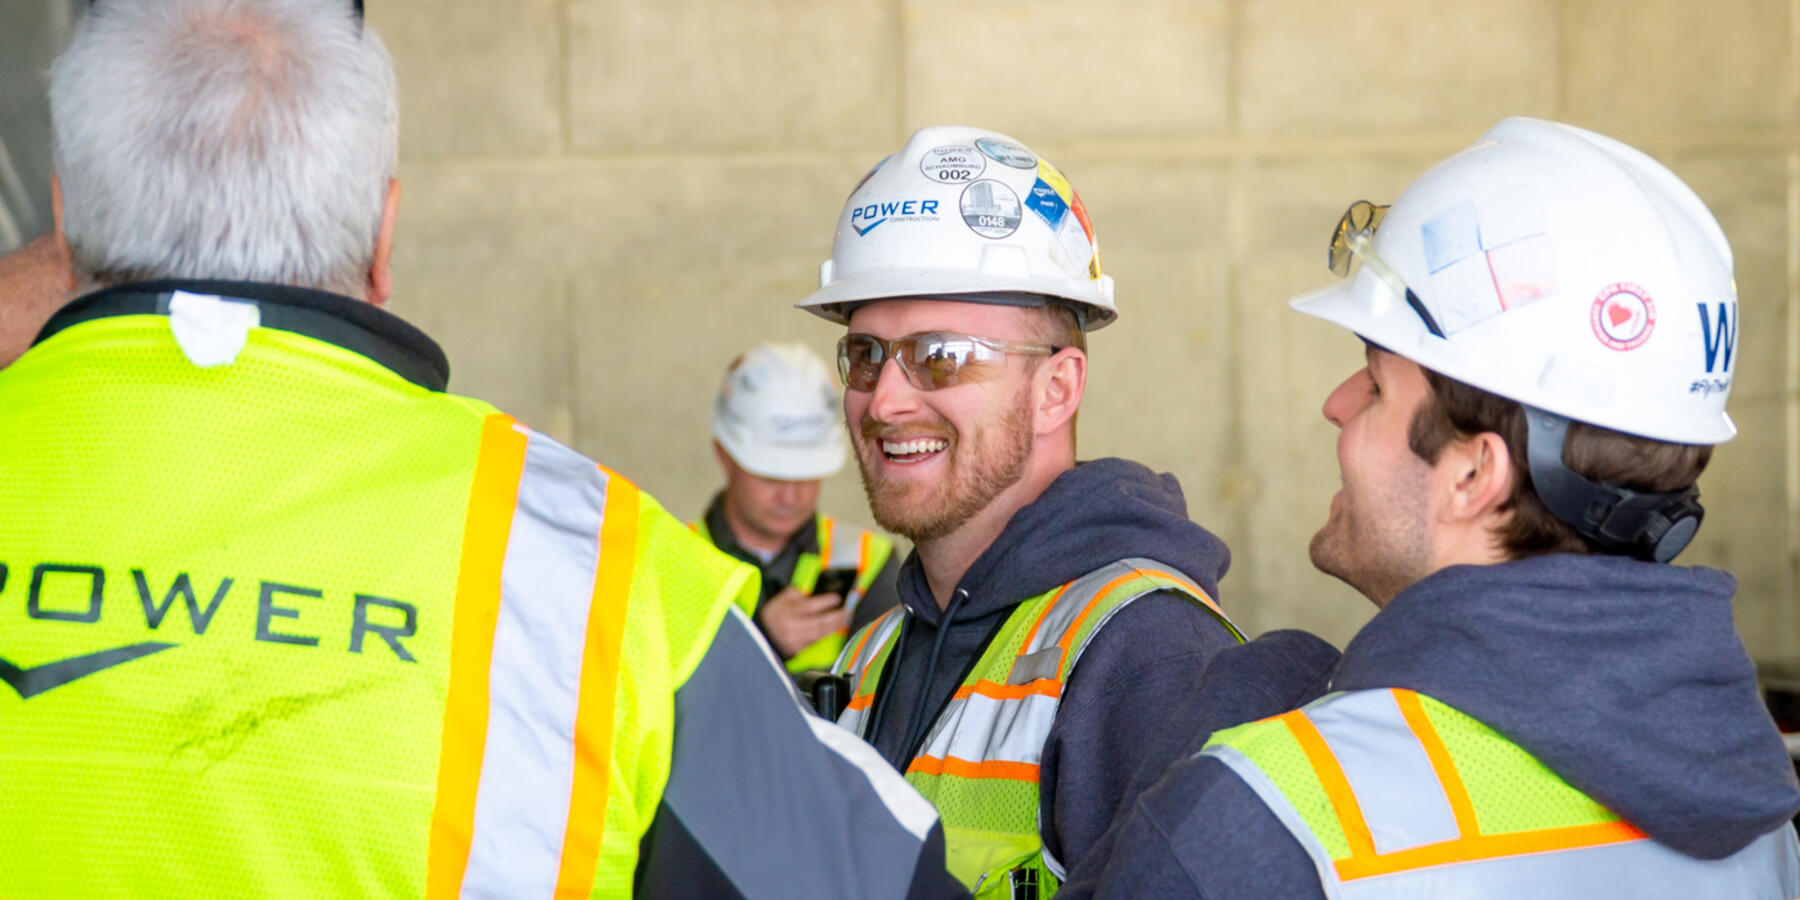 Power Construction Chicago Careers Employment Benefits